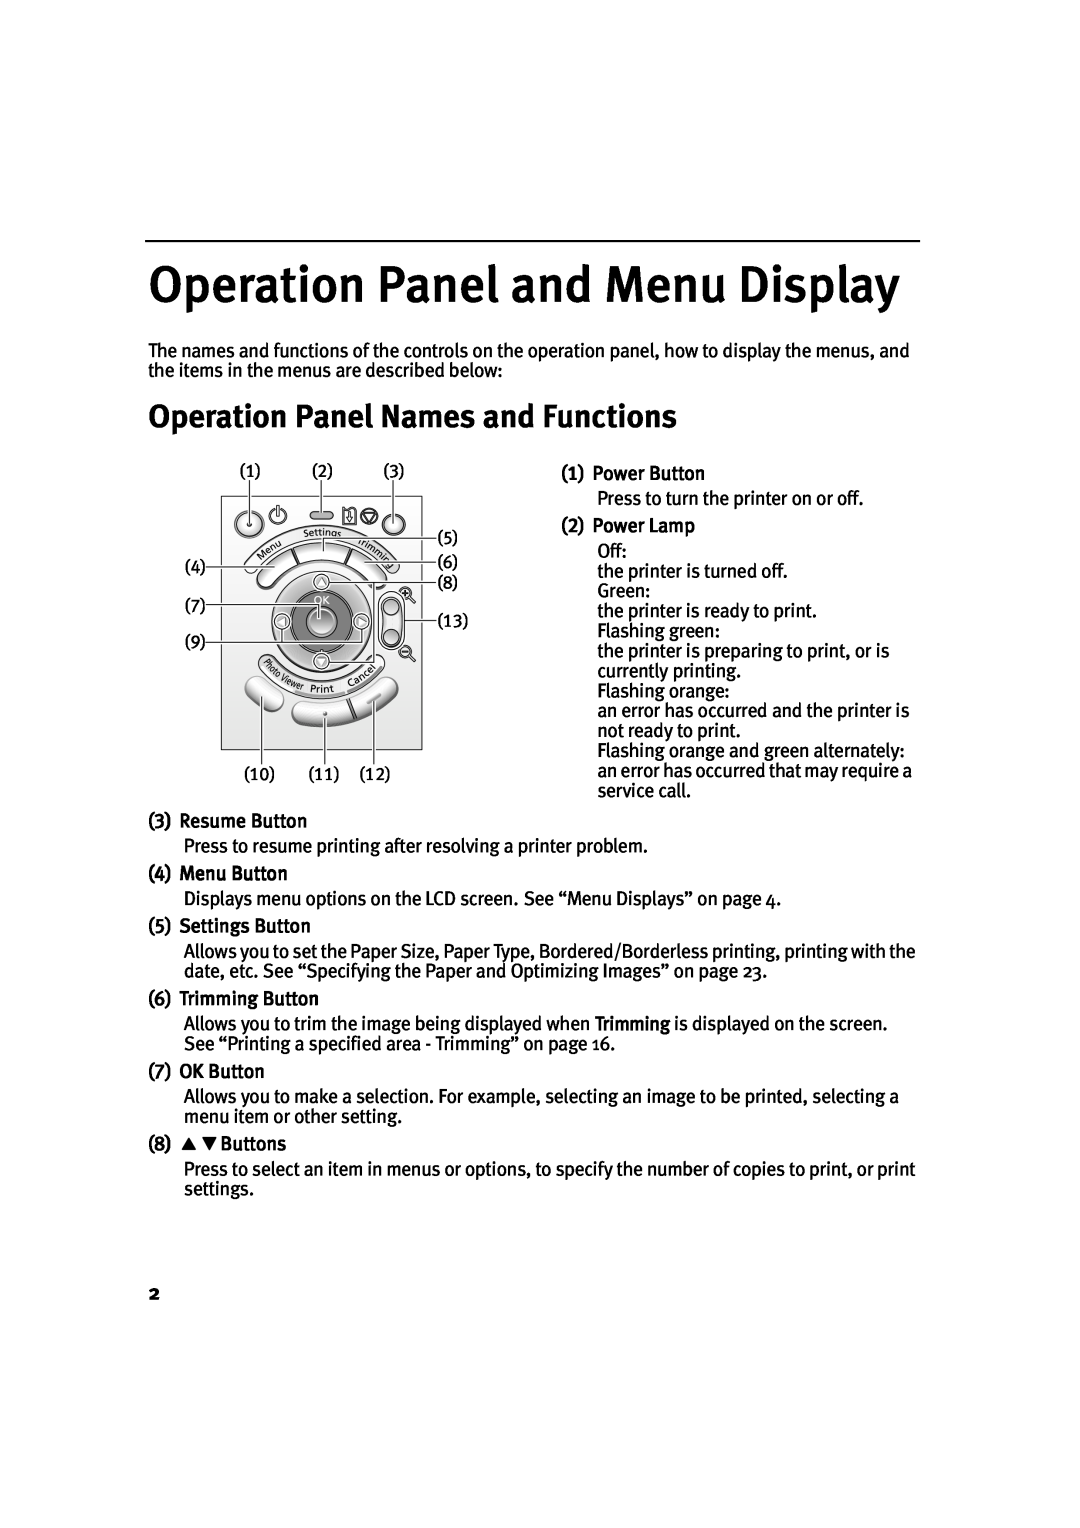 Canon 900D Operation Panel and Menu Display, Operation Panel Names and Functions, Power Lamp, Resume Button, Menu Button 